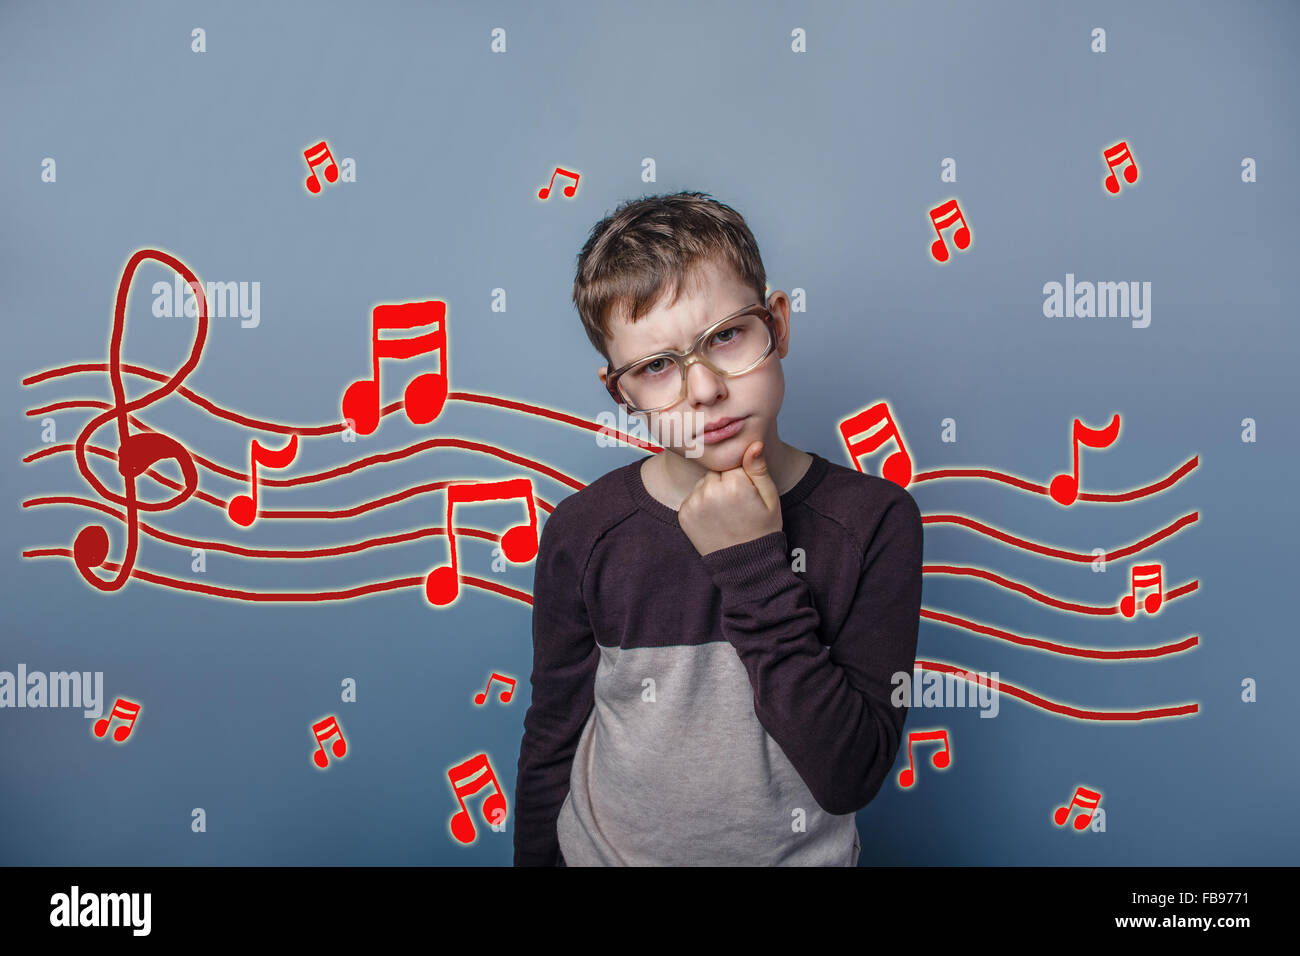 adolescent the boy in glasses thinking music notes sketch preven Stock Photo